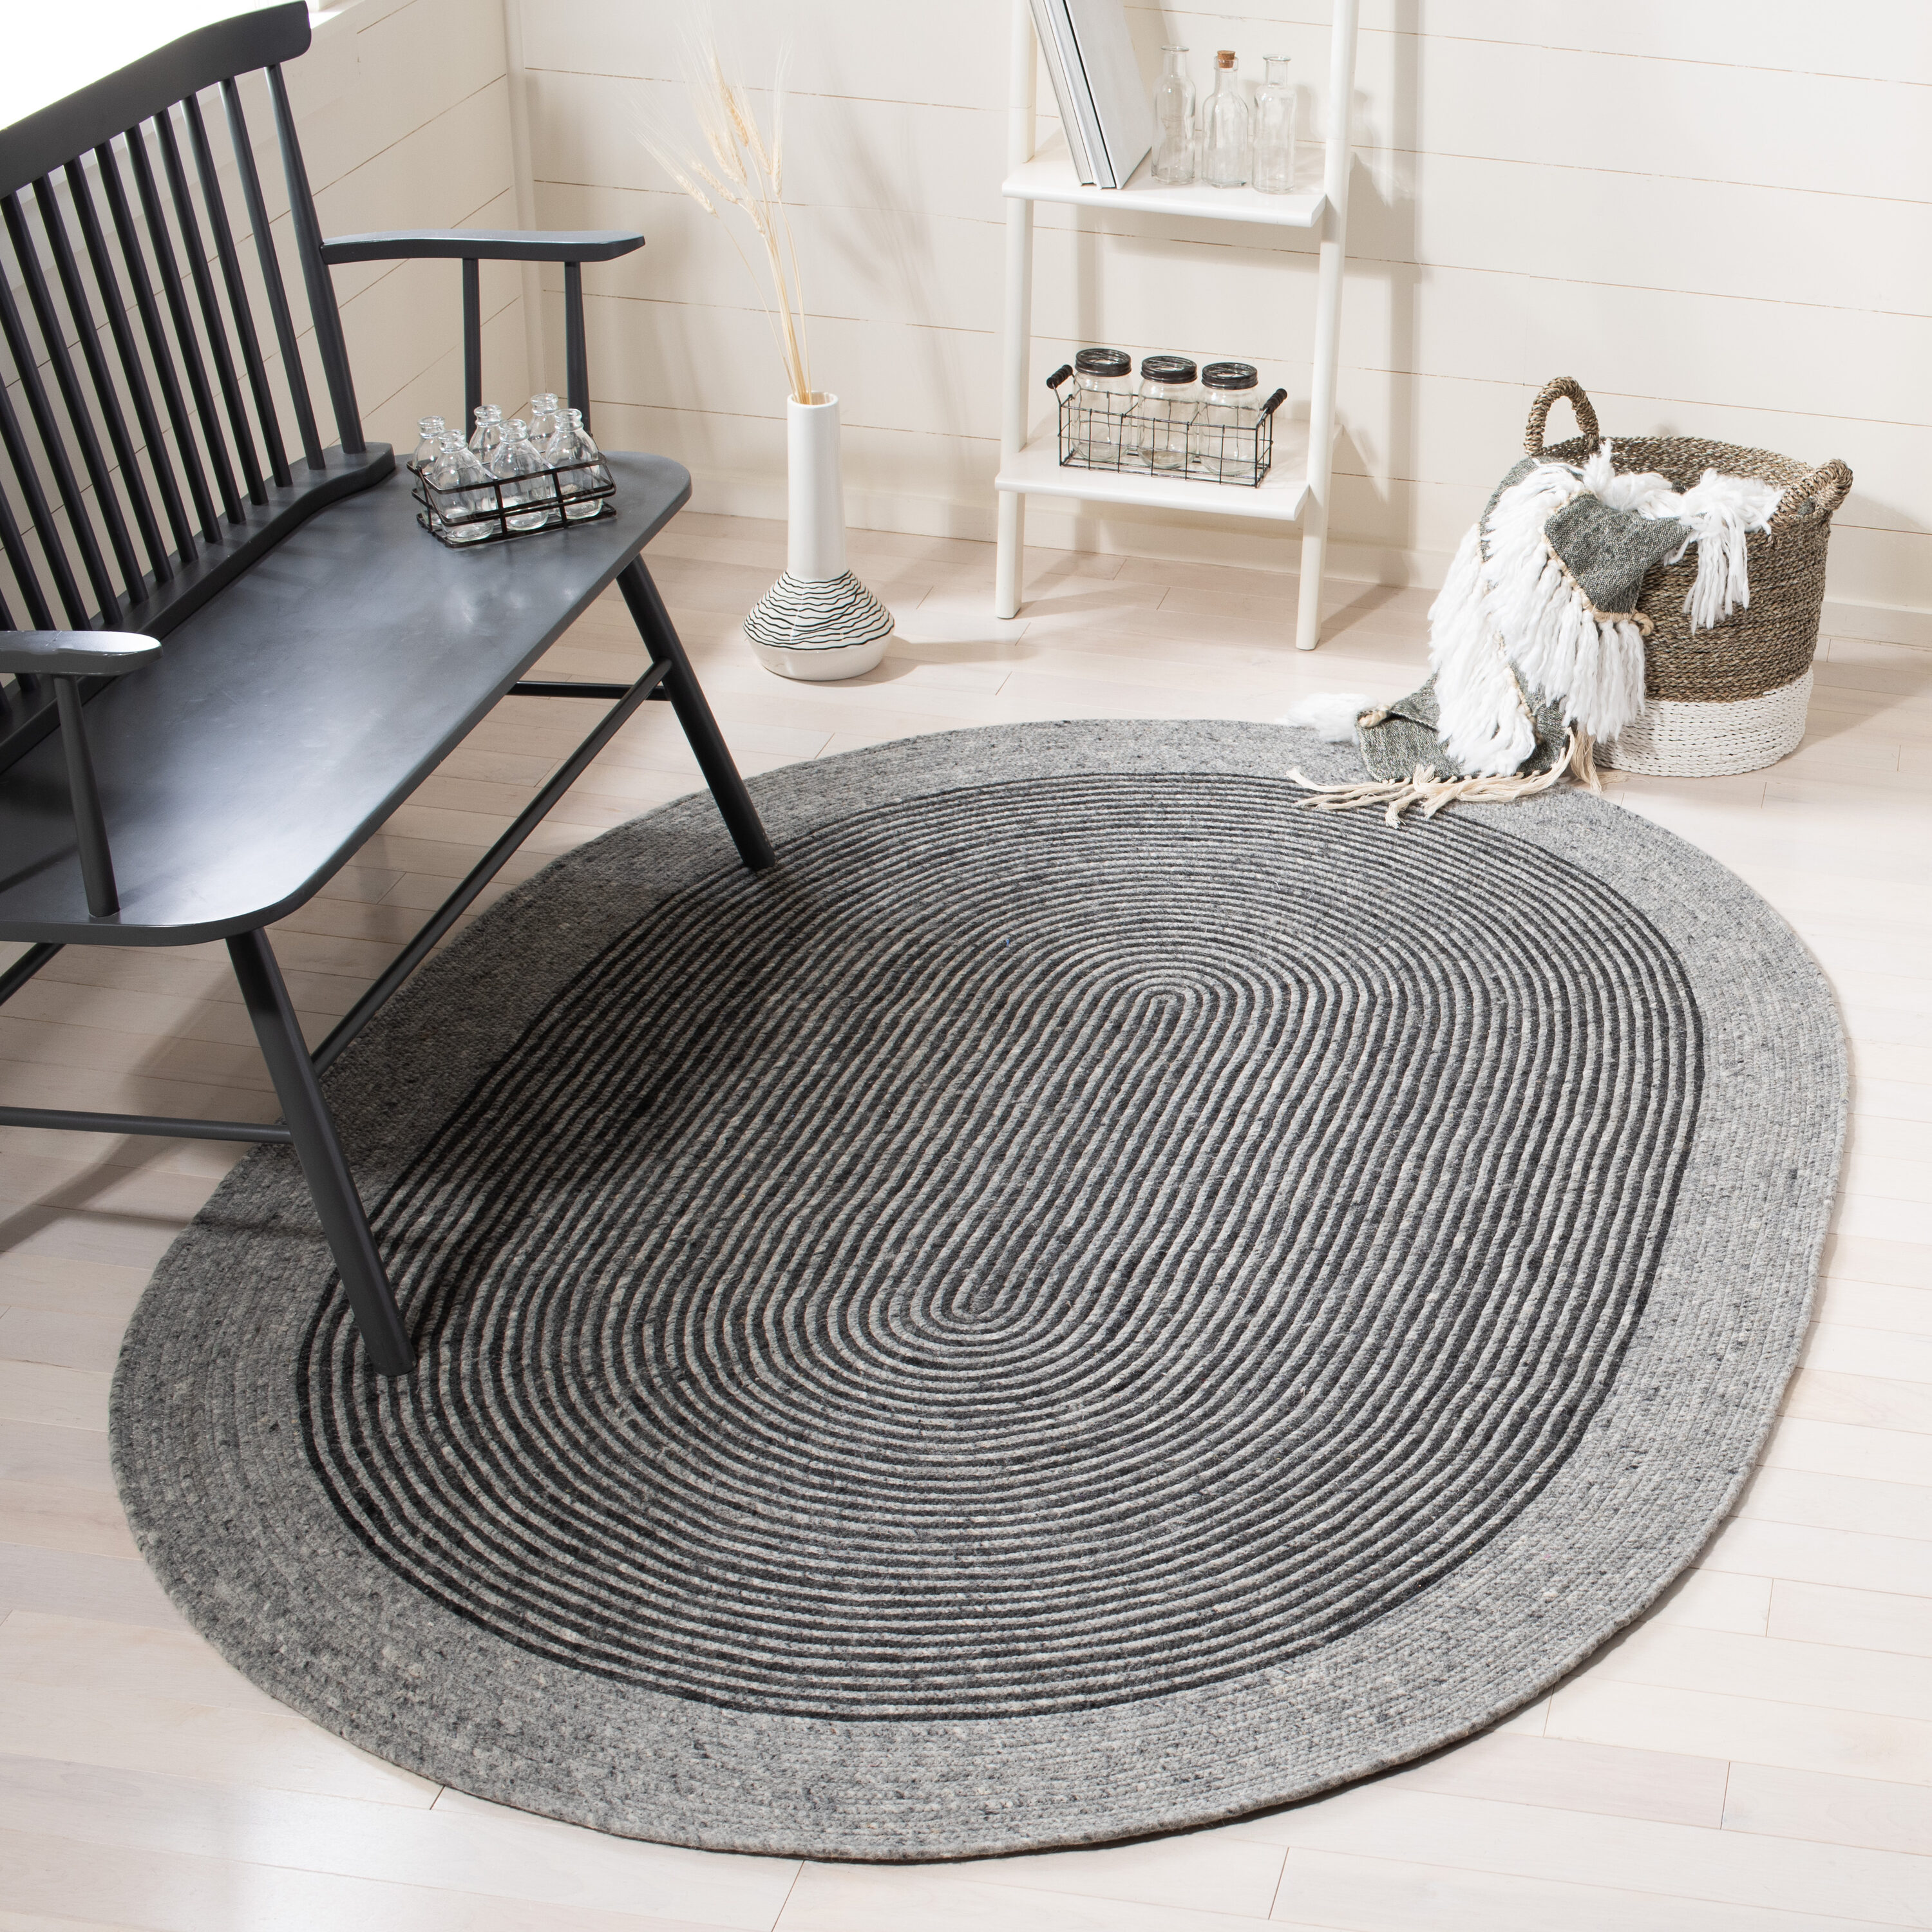 Safavieh Braided Nooria 5 X 7 (ft) Wool Gray/Black Oval Indoor Coastal Area  Rug in the Rugs department at